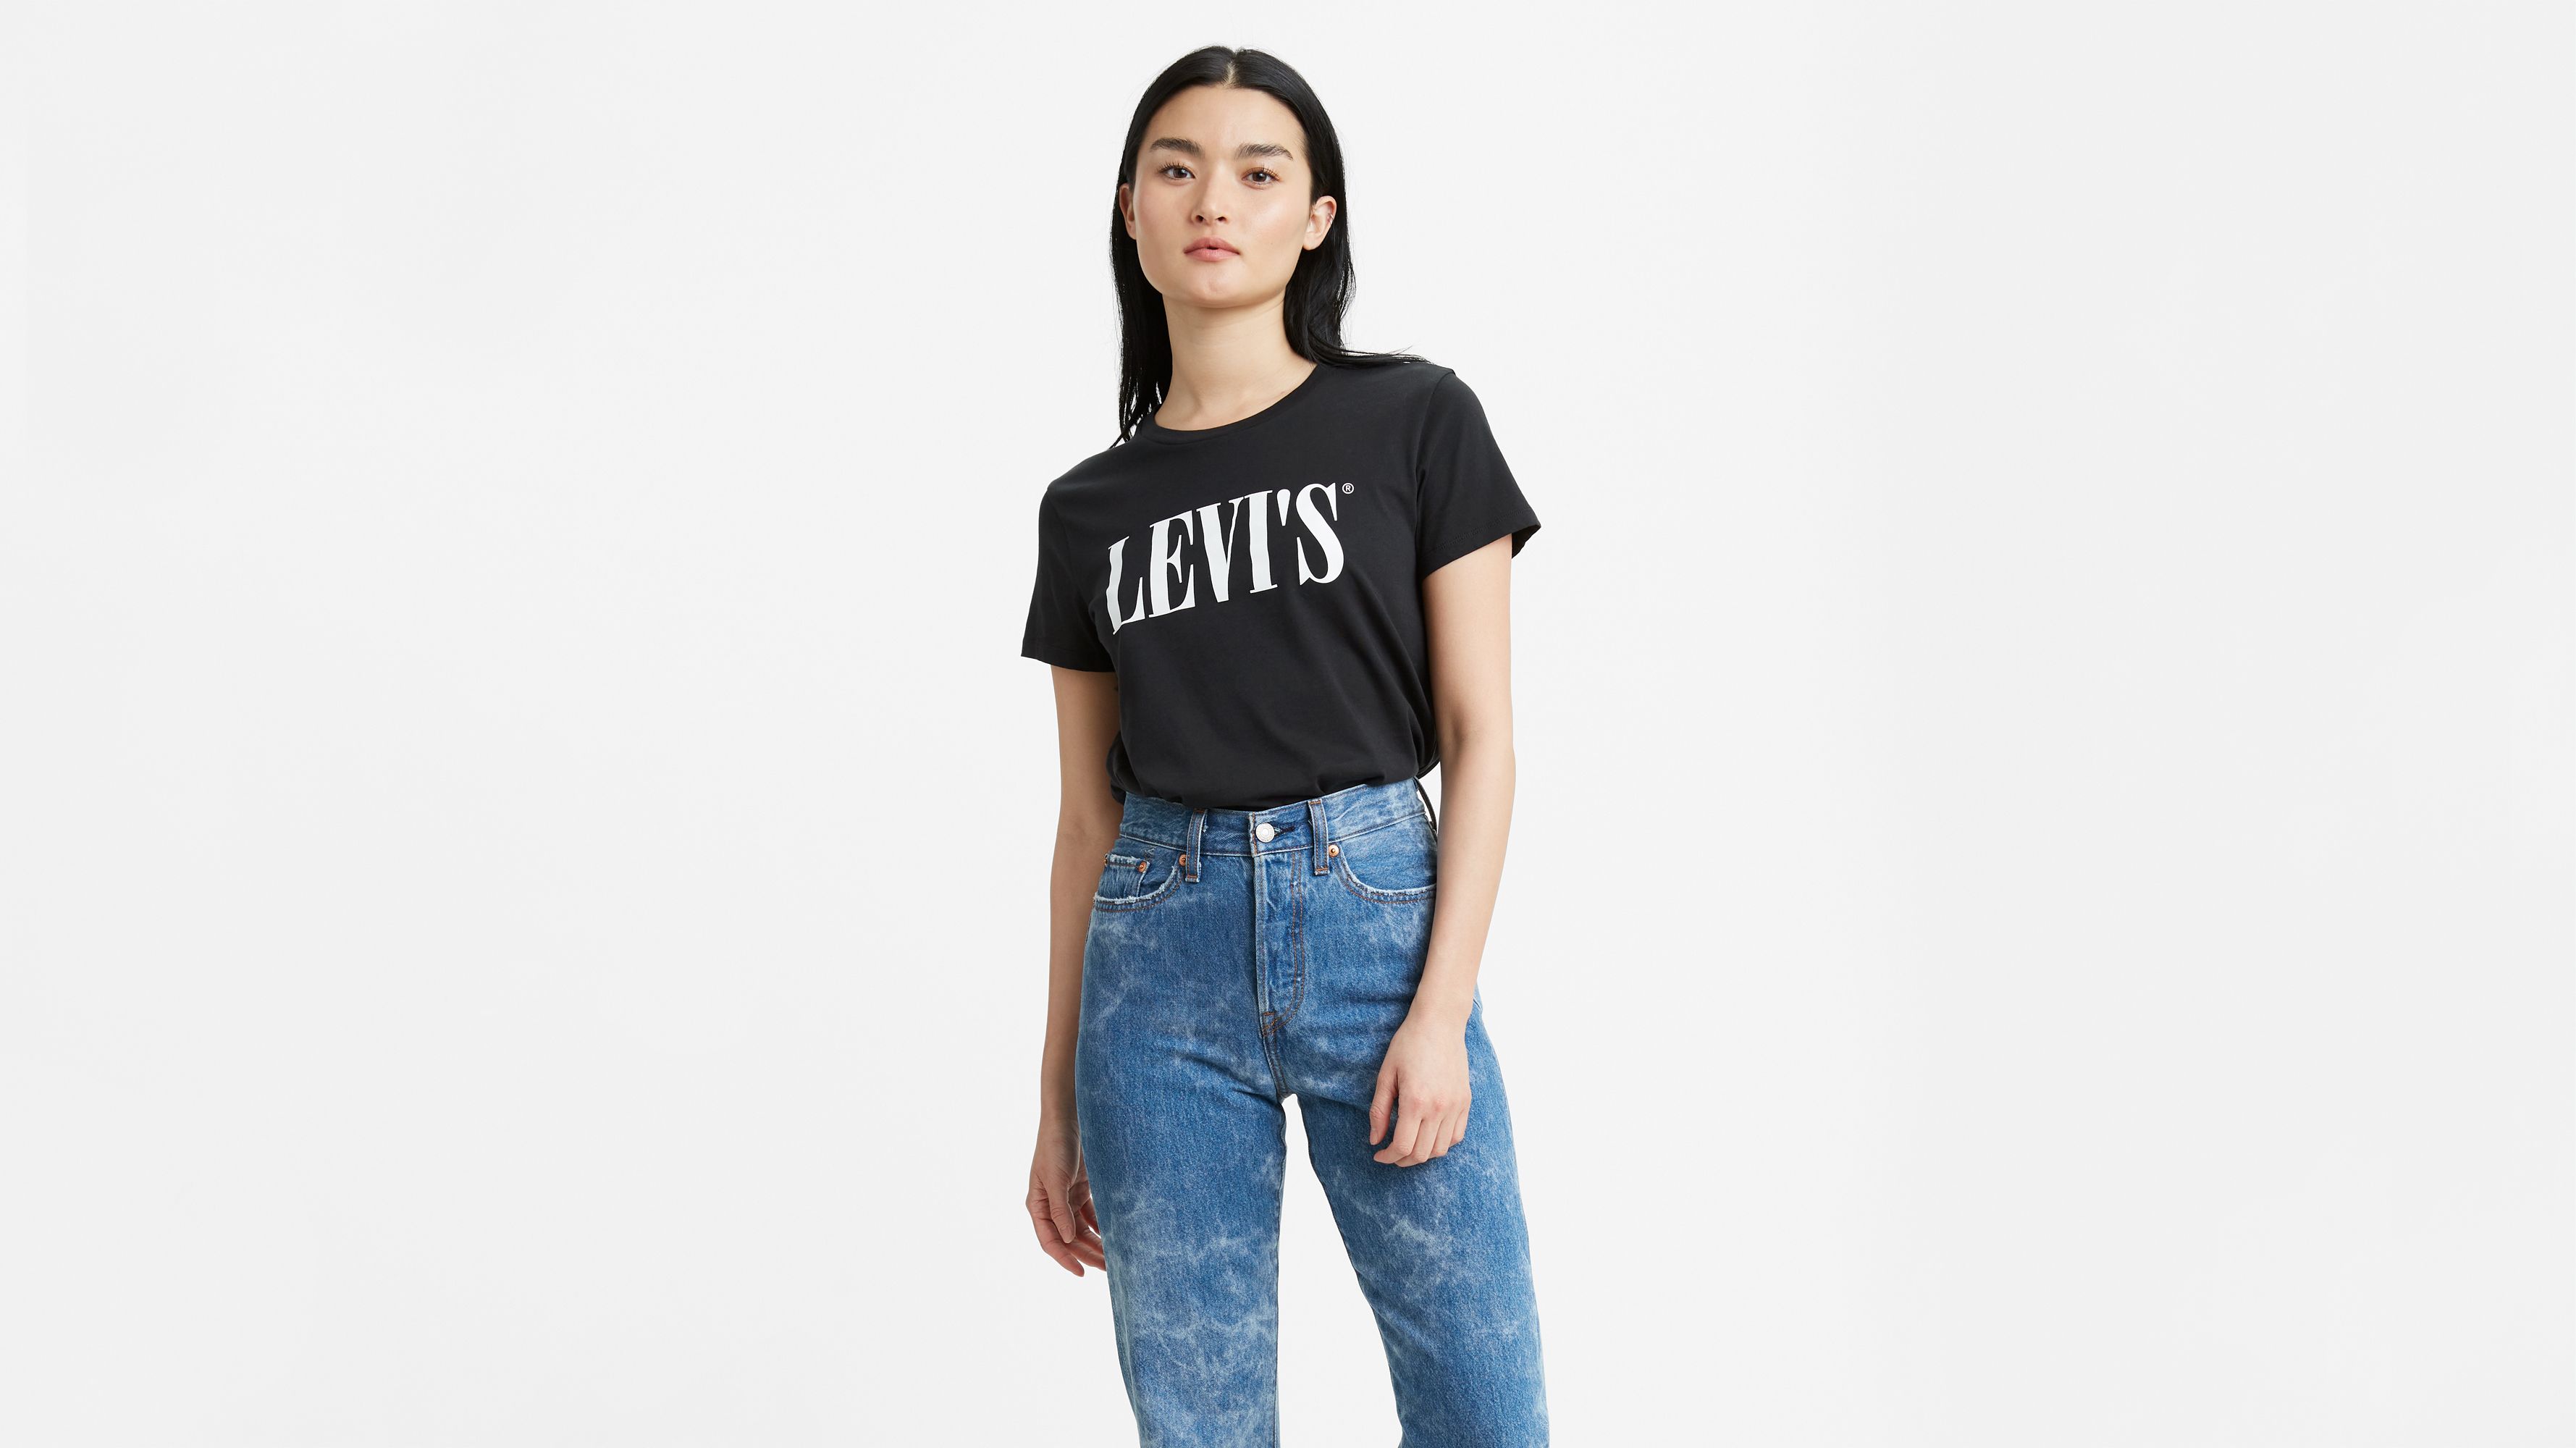 levis clothing